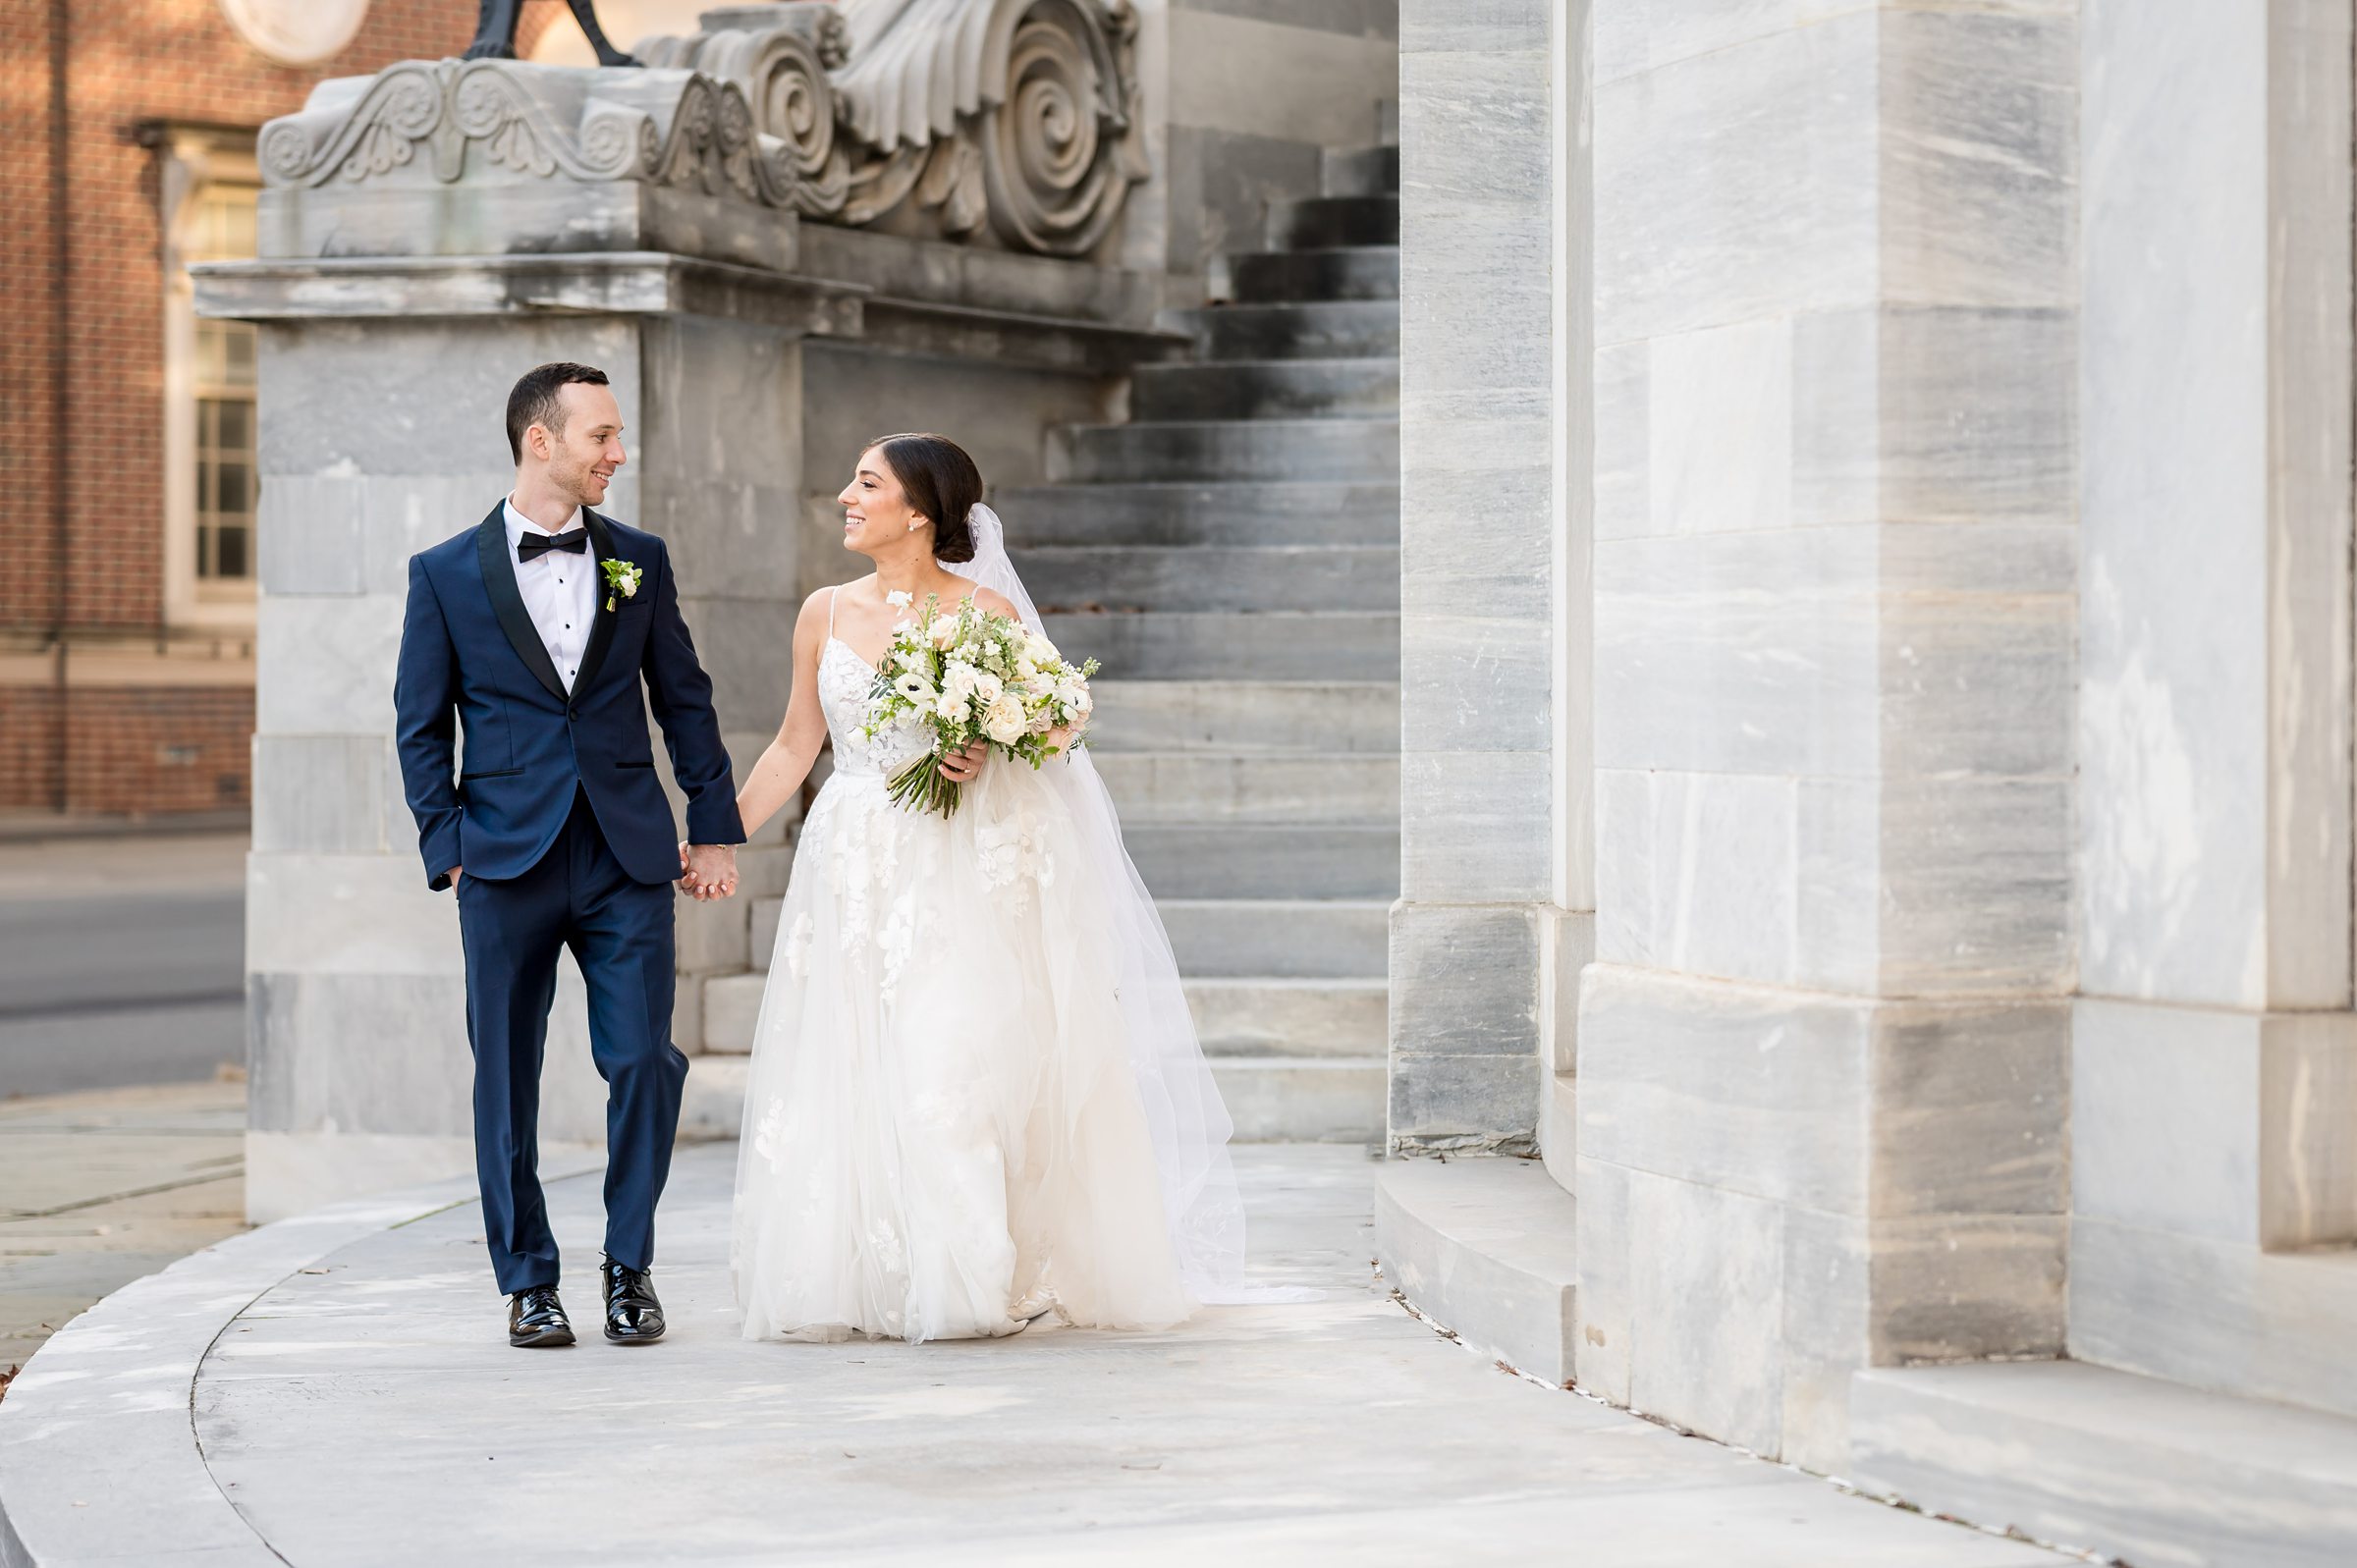 Lilah Events Wedding: A bride and groom descend the steps of a building.